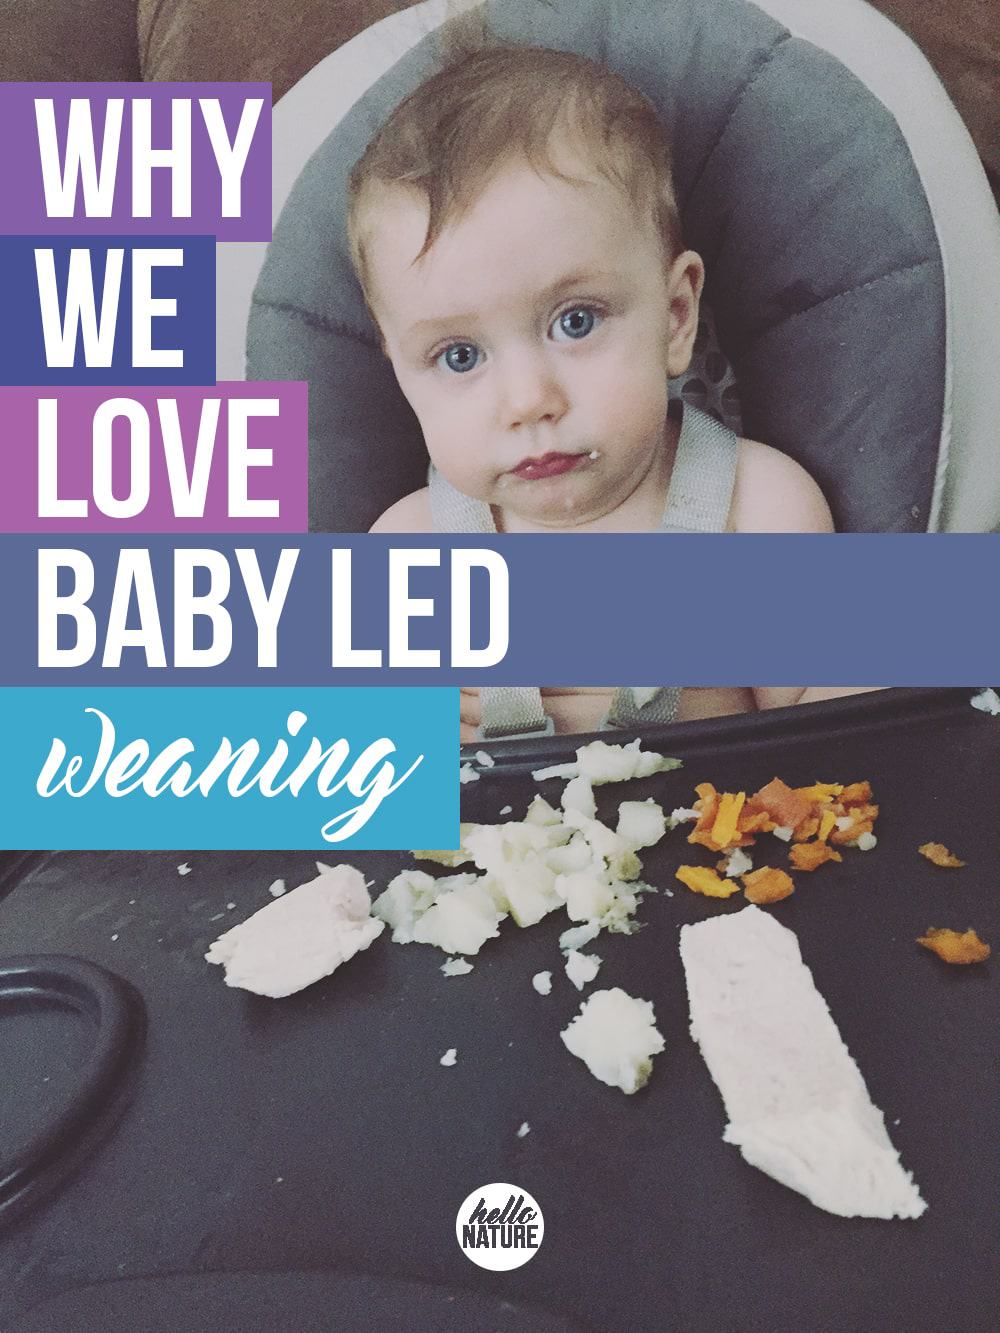 We knew we wanted to love baby led weaning, but we had no idea if we would. See why it's one of the best parenting decisions we've made!